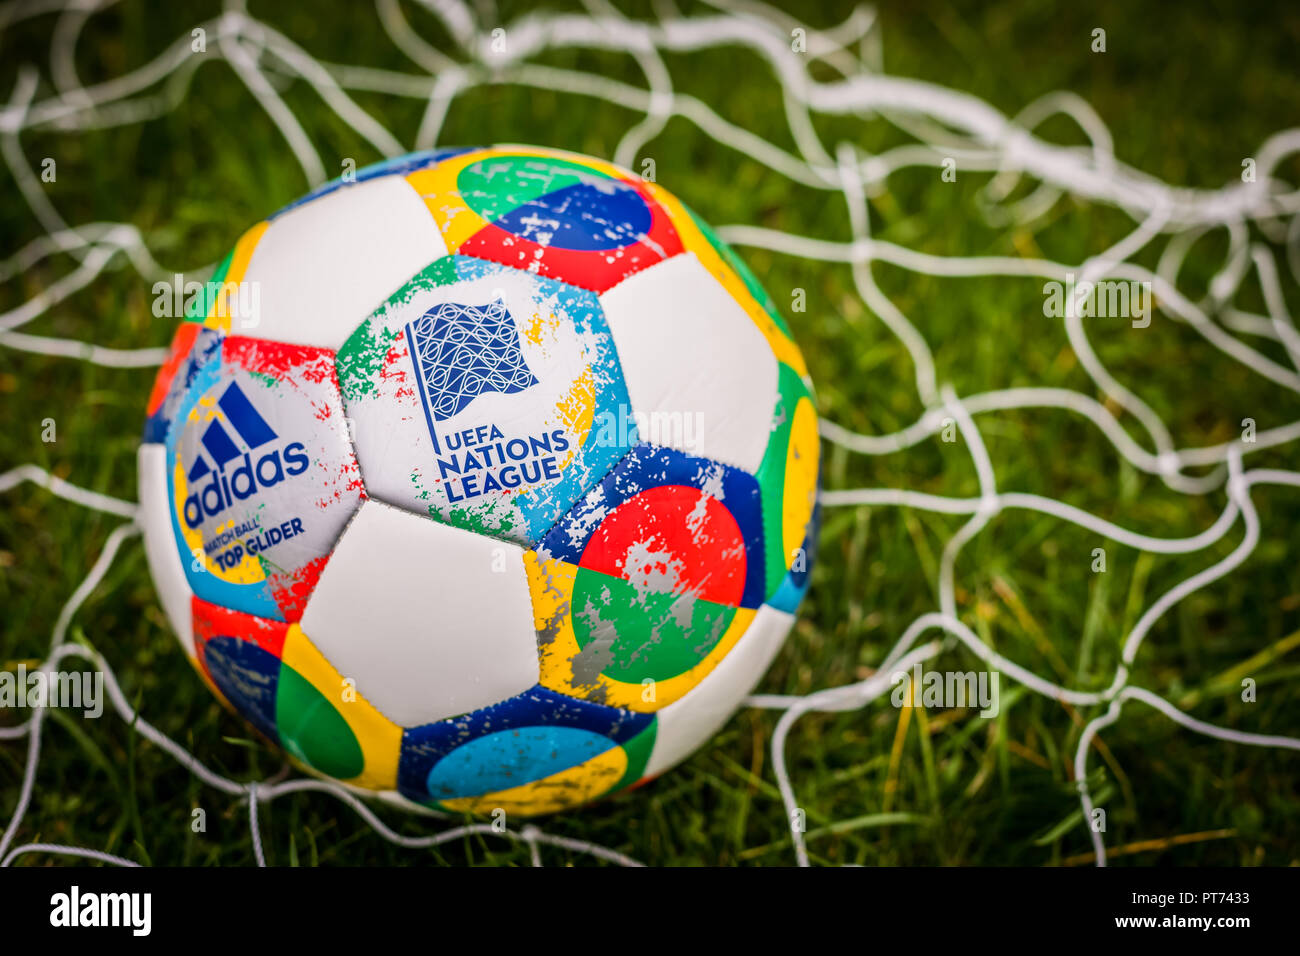 Adidas Football High Resolution Stock Photography and Images - Alamy